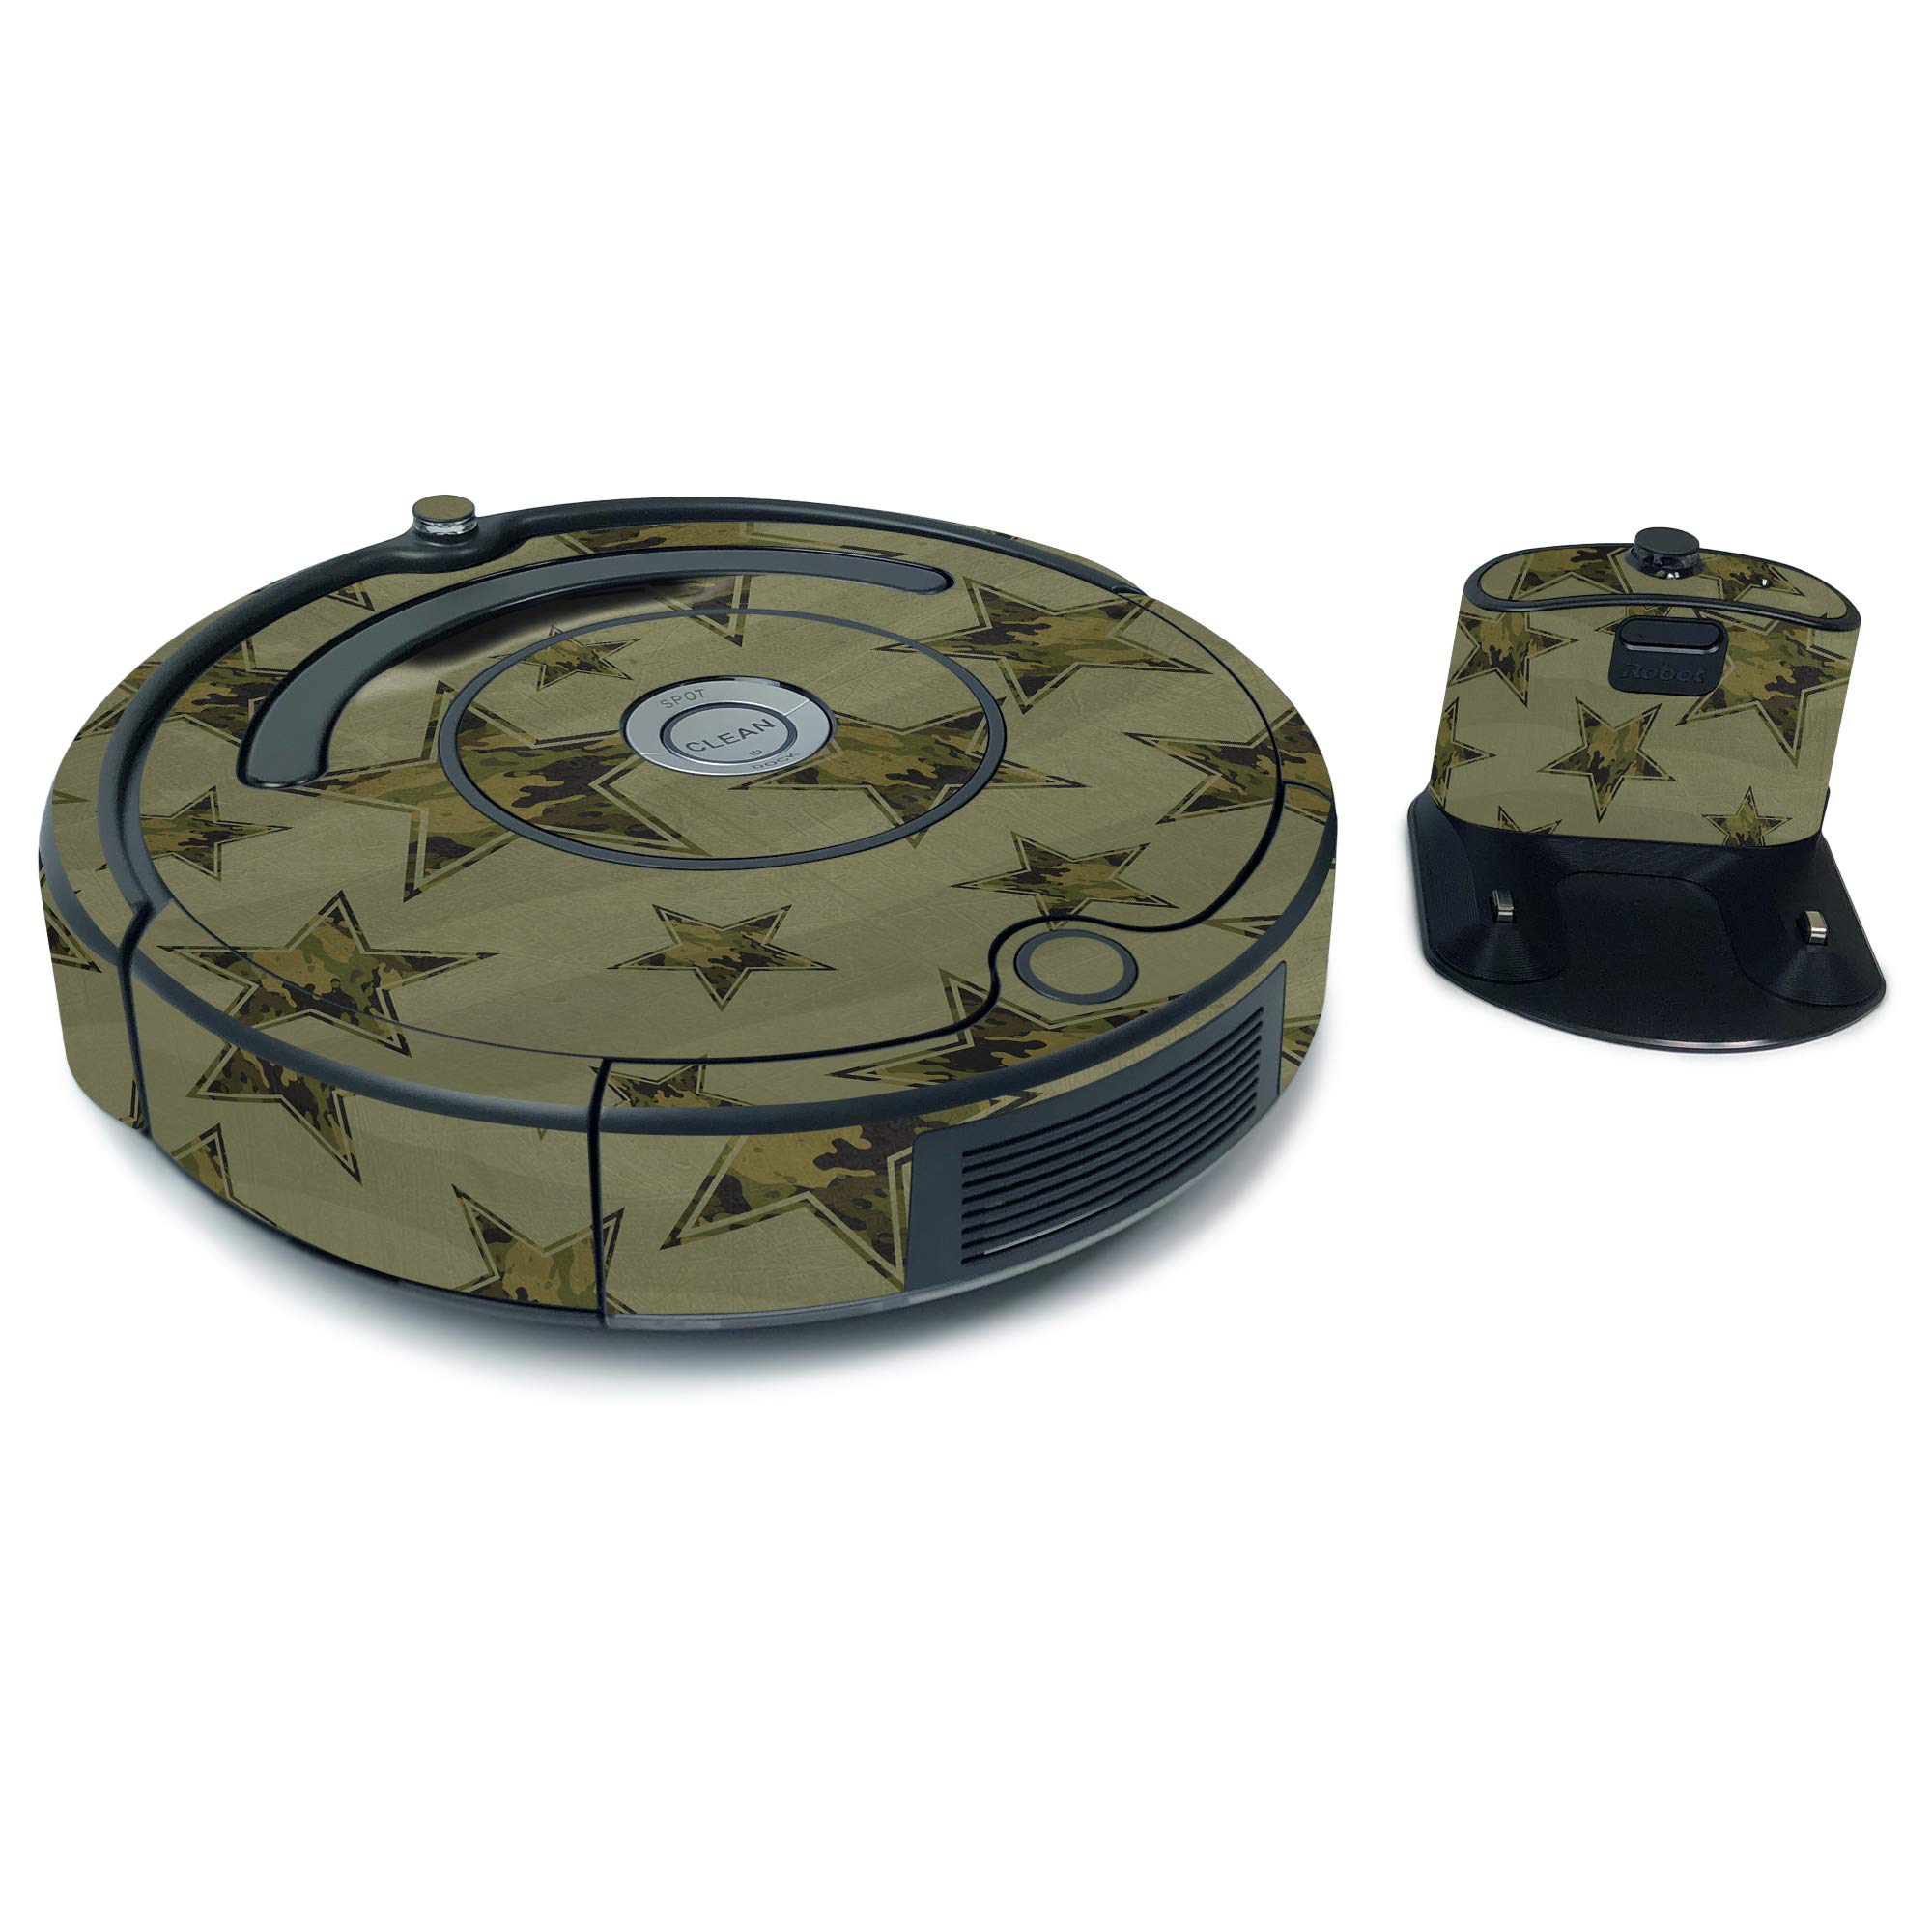 MightySkins Skin for iRobot Roomba 675 Max Coverage - Army Star | Protective, Durable, and Unique Vinyl Decal wrap Cover | Easy to Apply, Remove, and Change Styles | Made in The USA